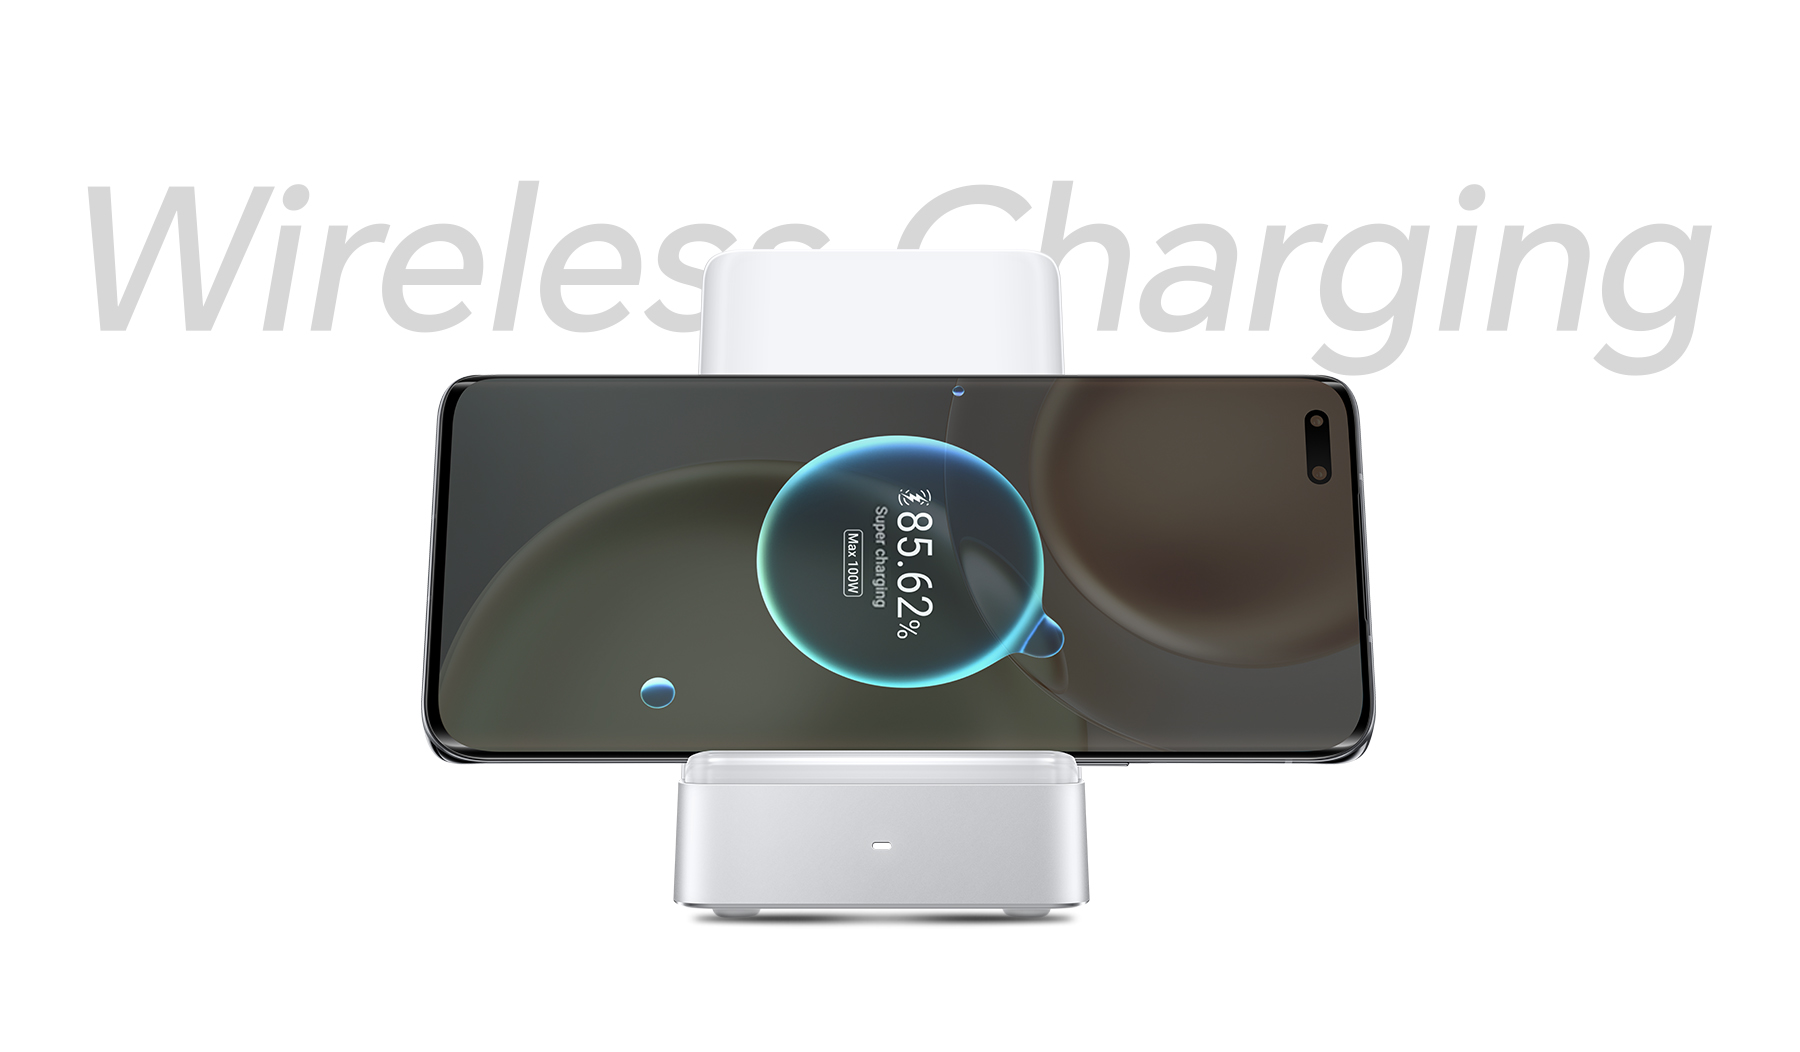 The Future of Wireless Charging